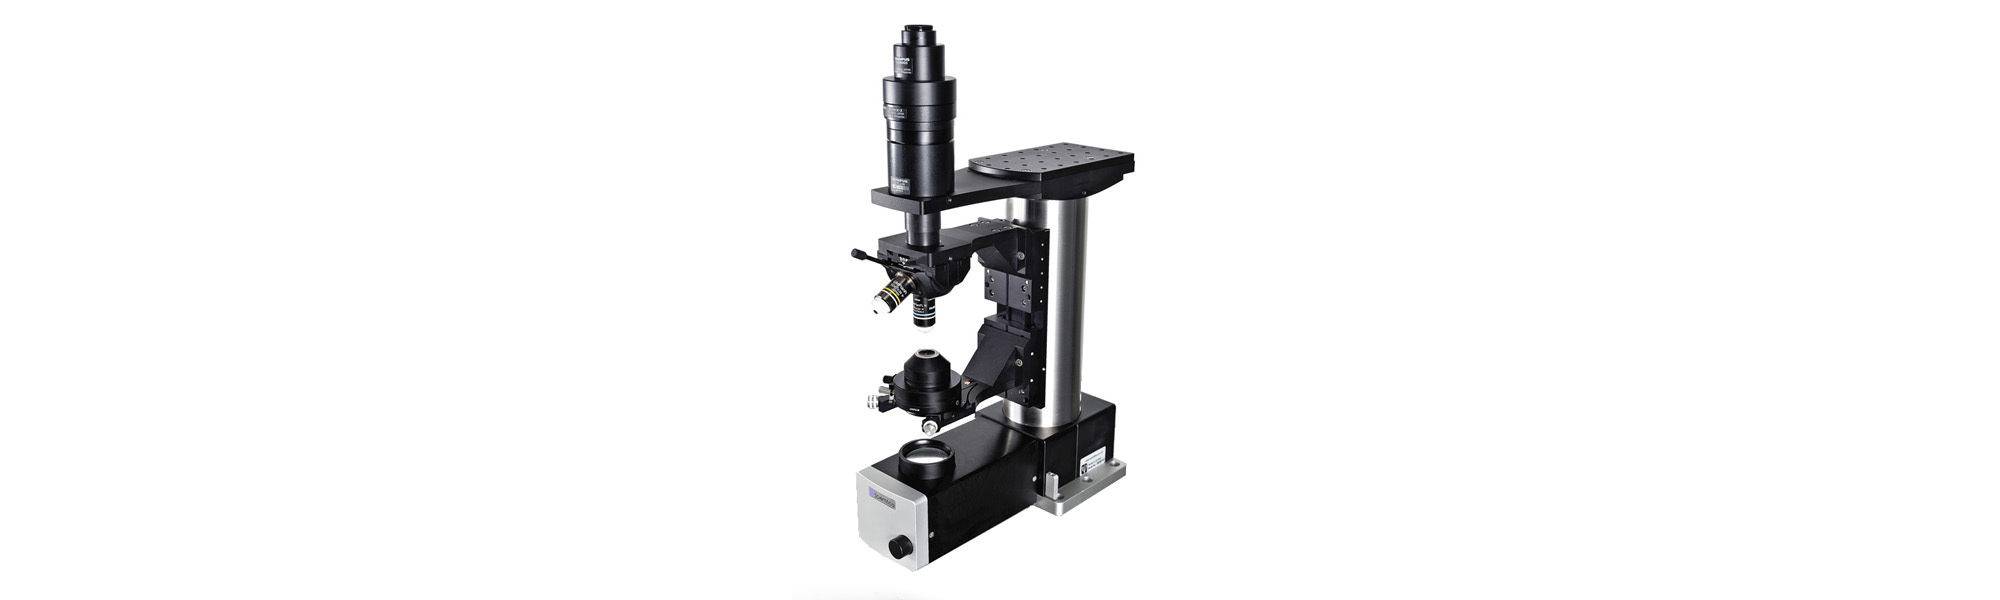 Microscopes for multiphoton imaging and electrophysiology